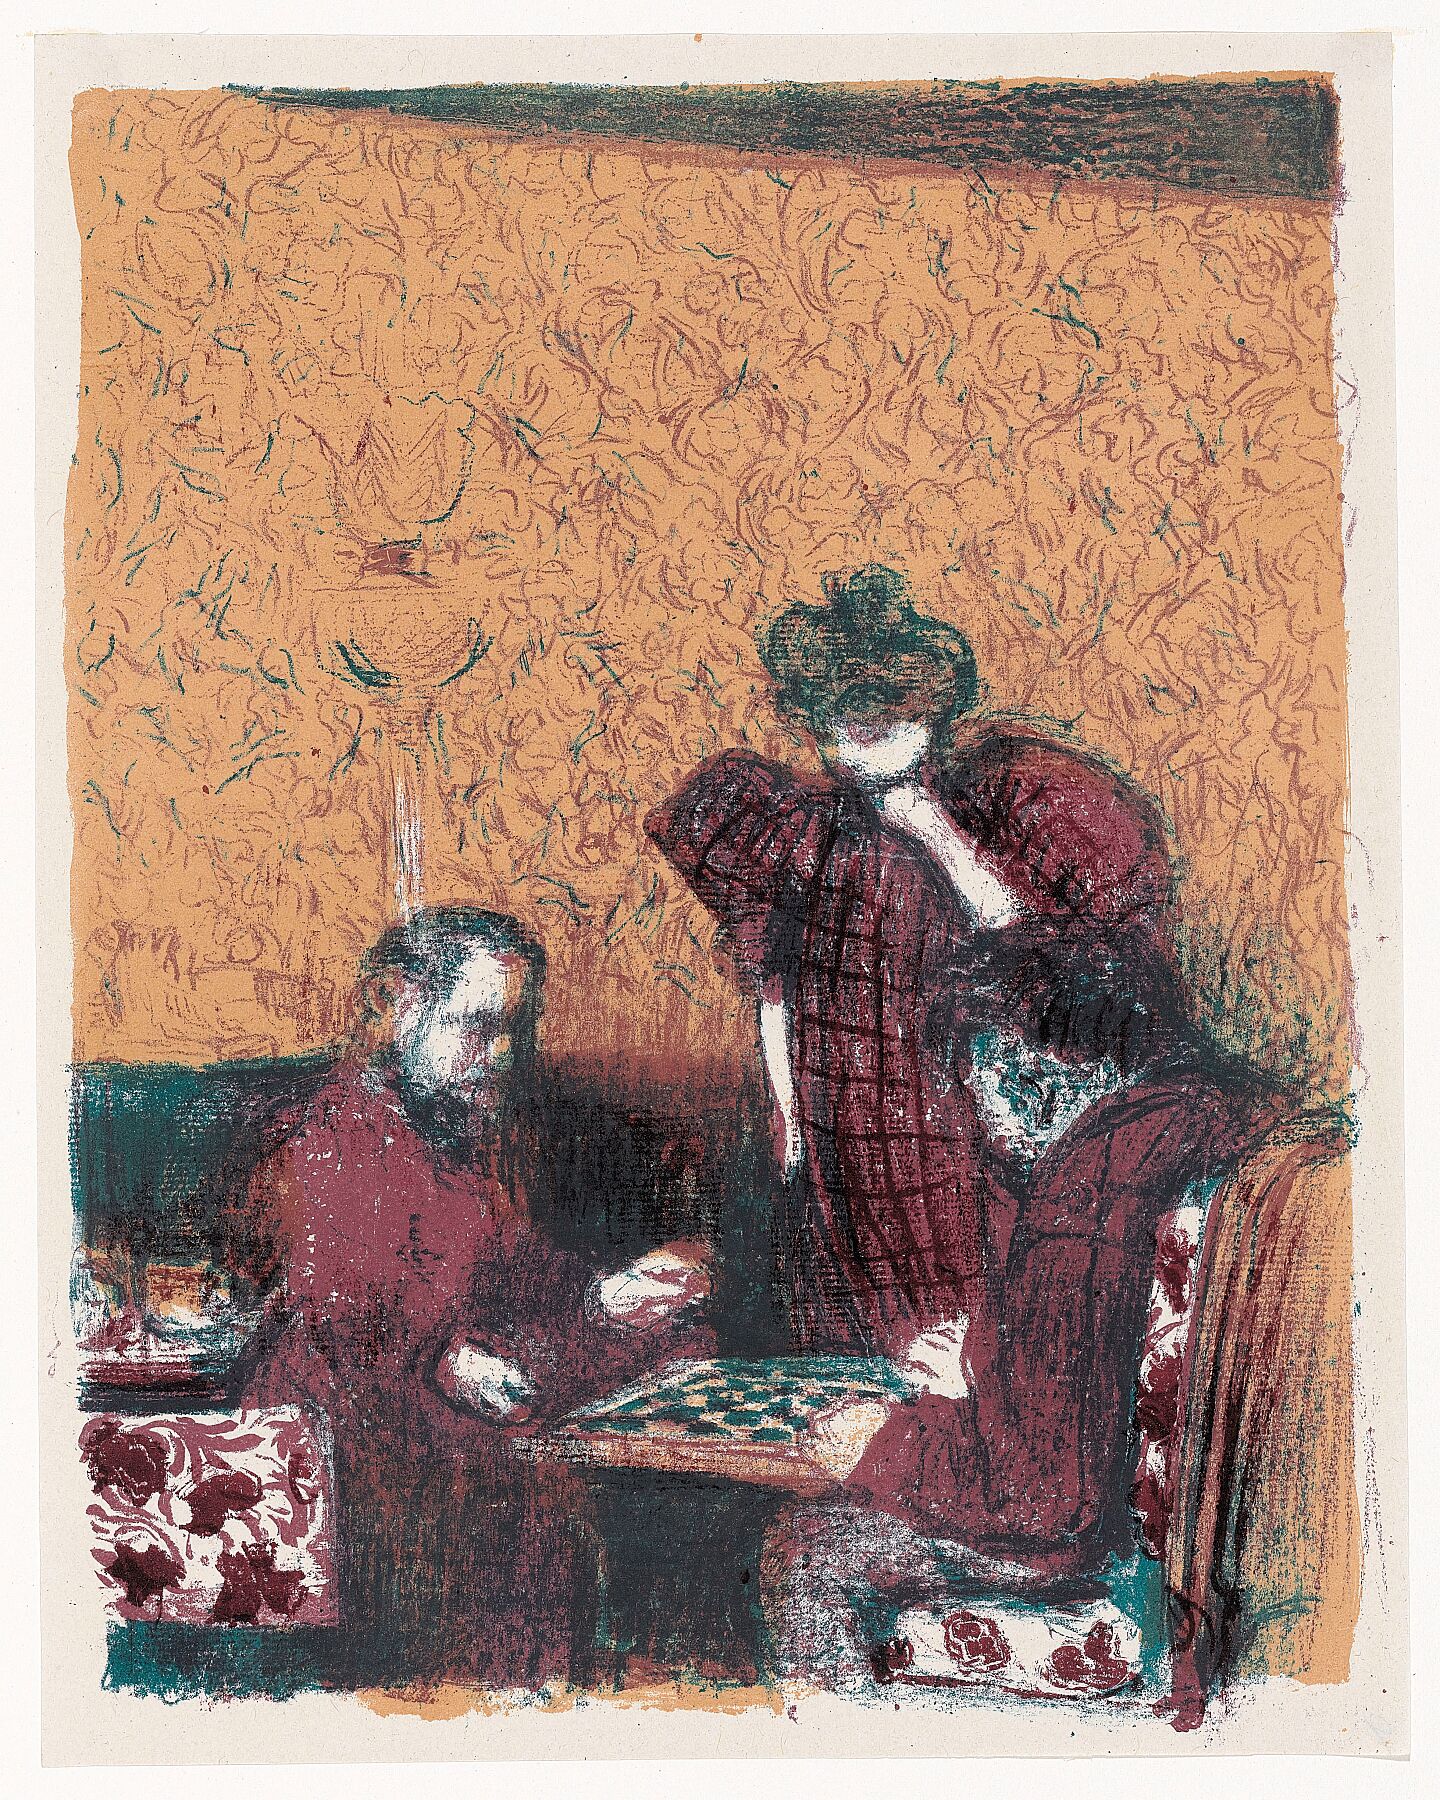 La Partie de Dames From a series of Lithographs titled Landscapes and Interiors by Edouard Vuillard 1899